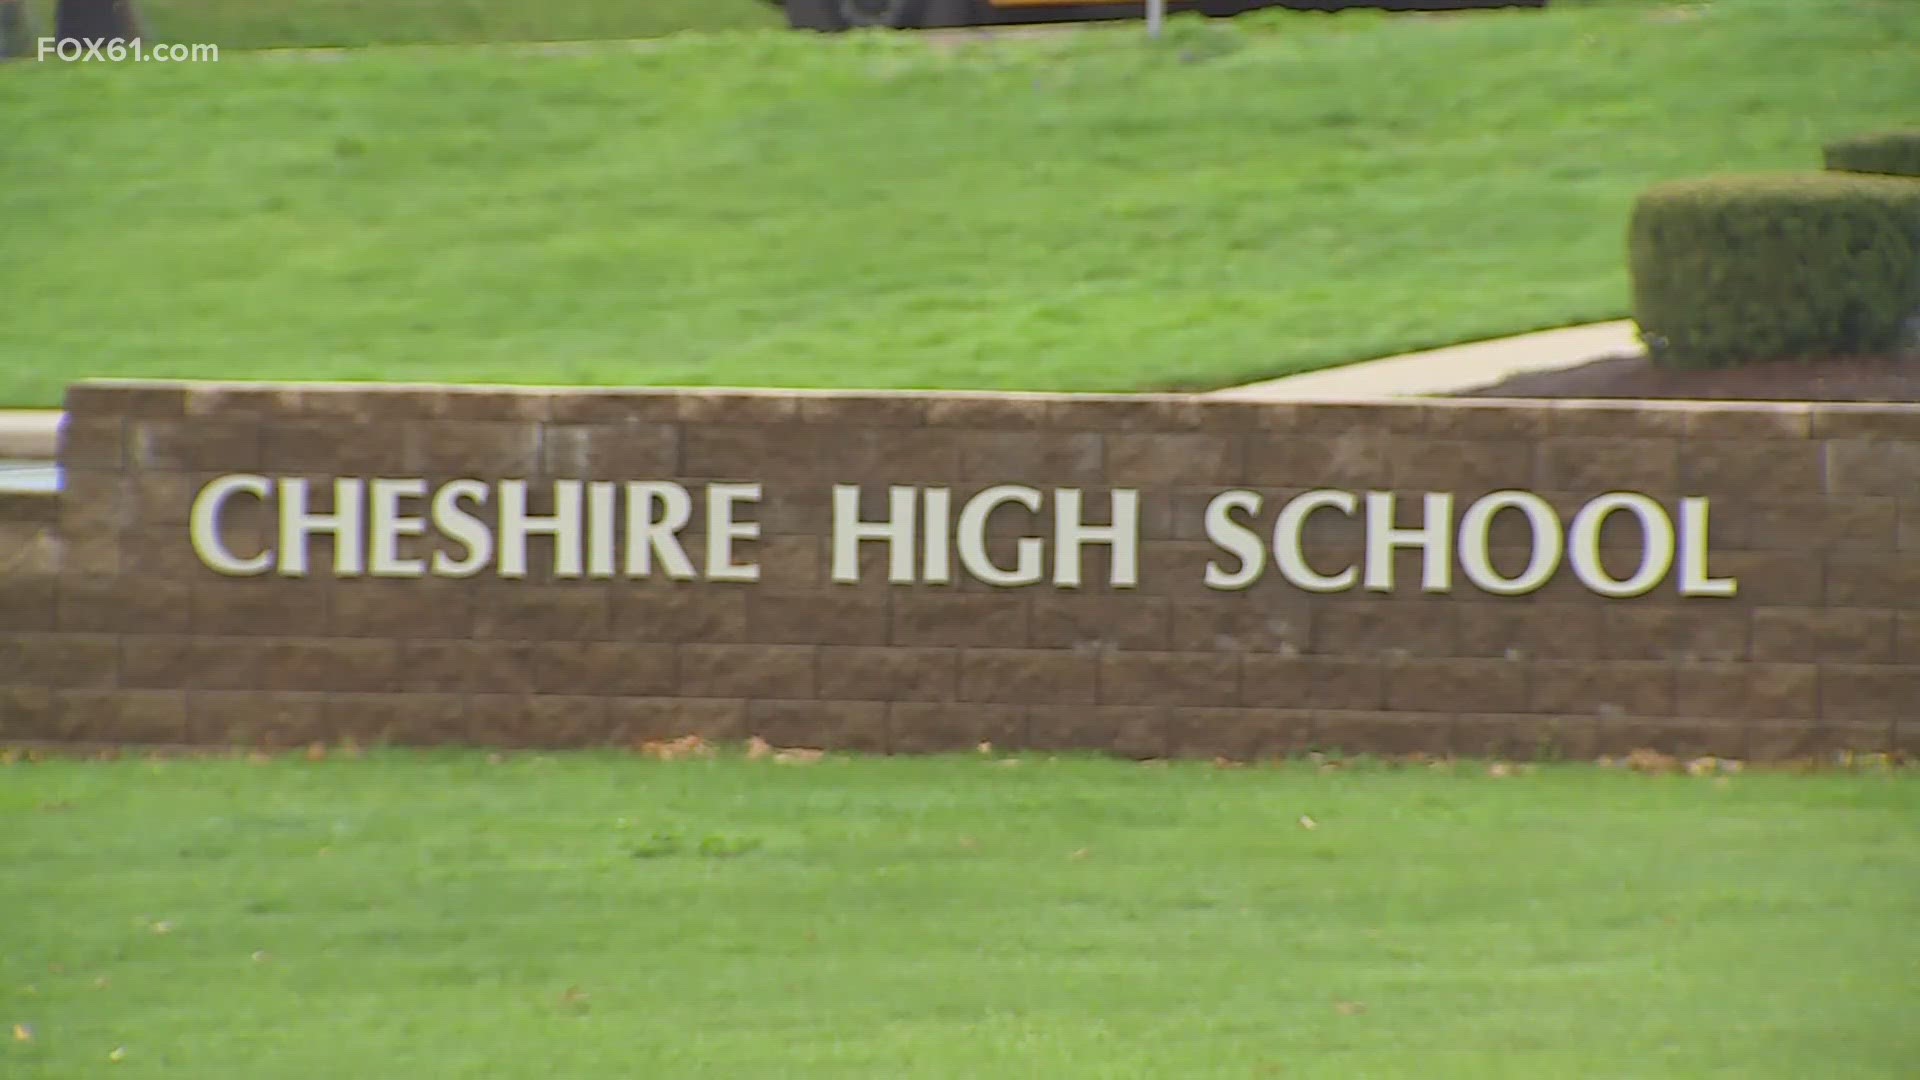 There's still outrage over an anonymous Facebook post that called 22 Cheshire High School students from New Haven "thugs."